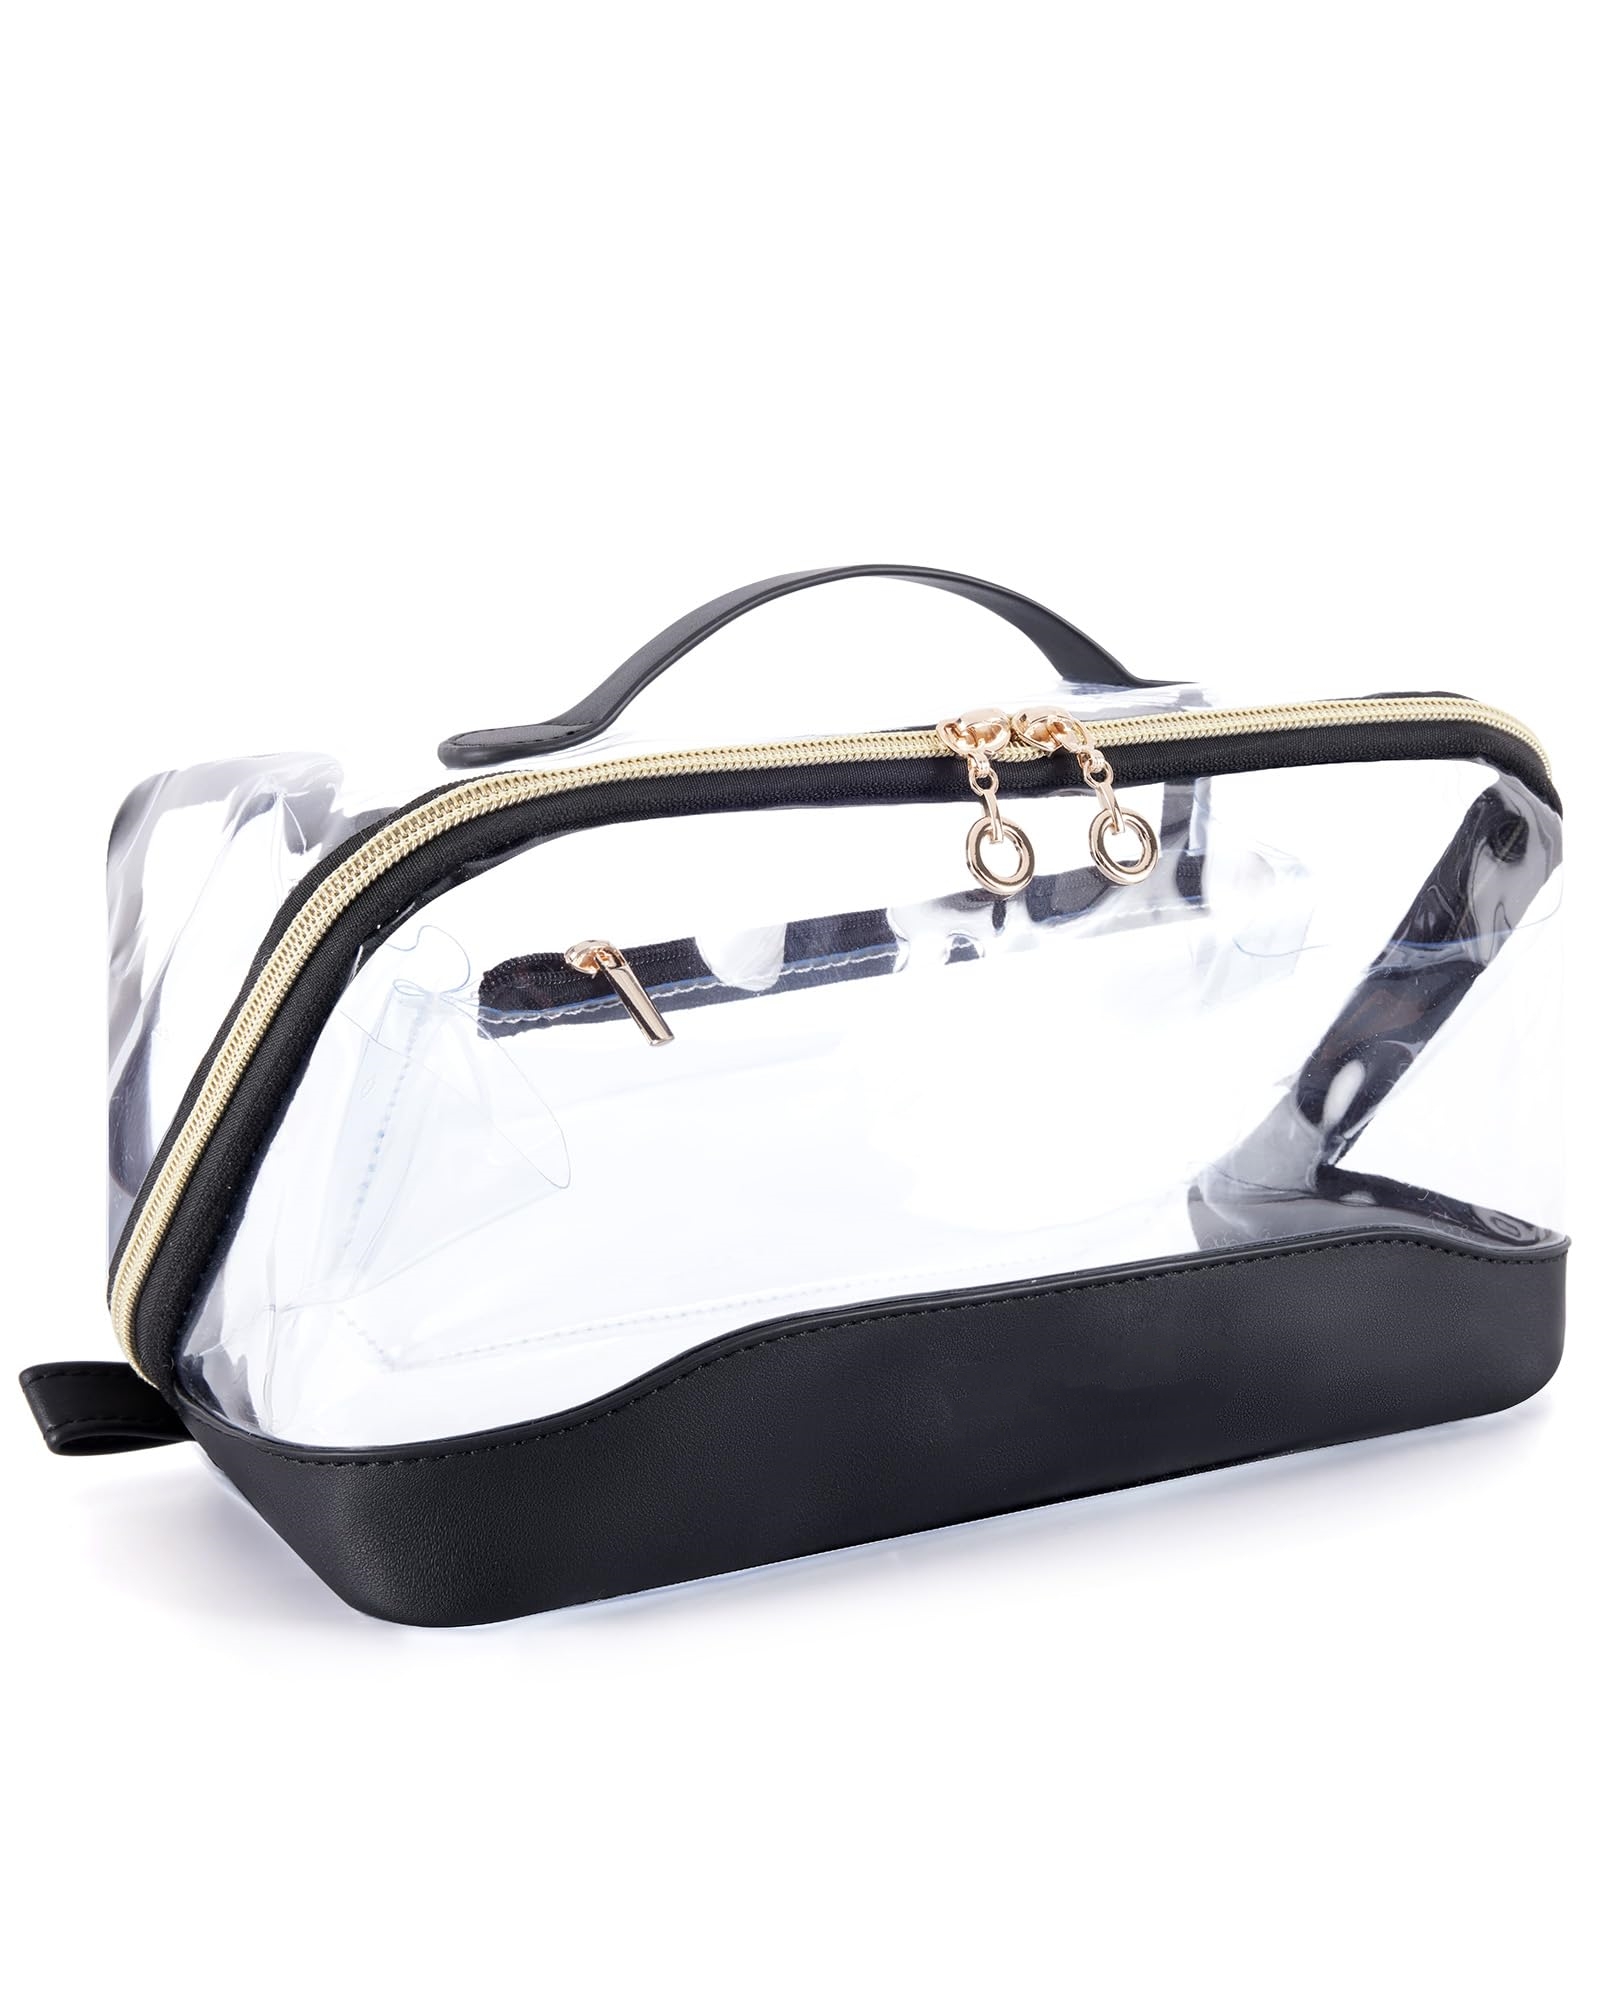 Makeup Bag Cosmetic Bag Clear Travel Makeup Bag Water-resistent Makeup Bags for WomenPortable Pouch Make Up Organizer Bag for Toiletries Brushes